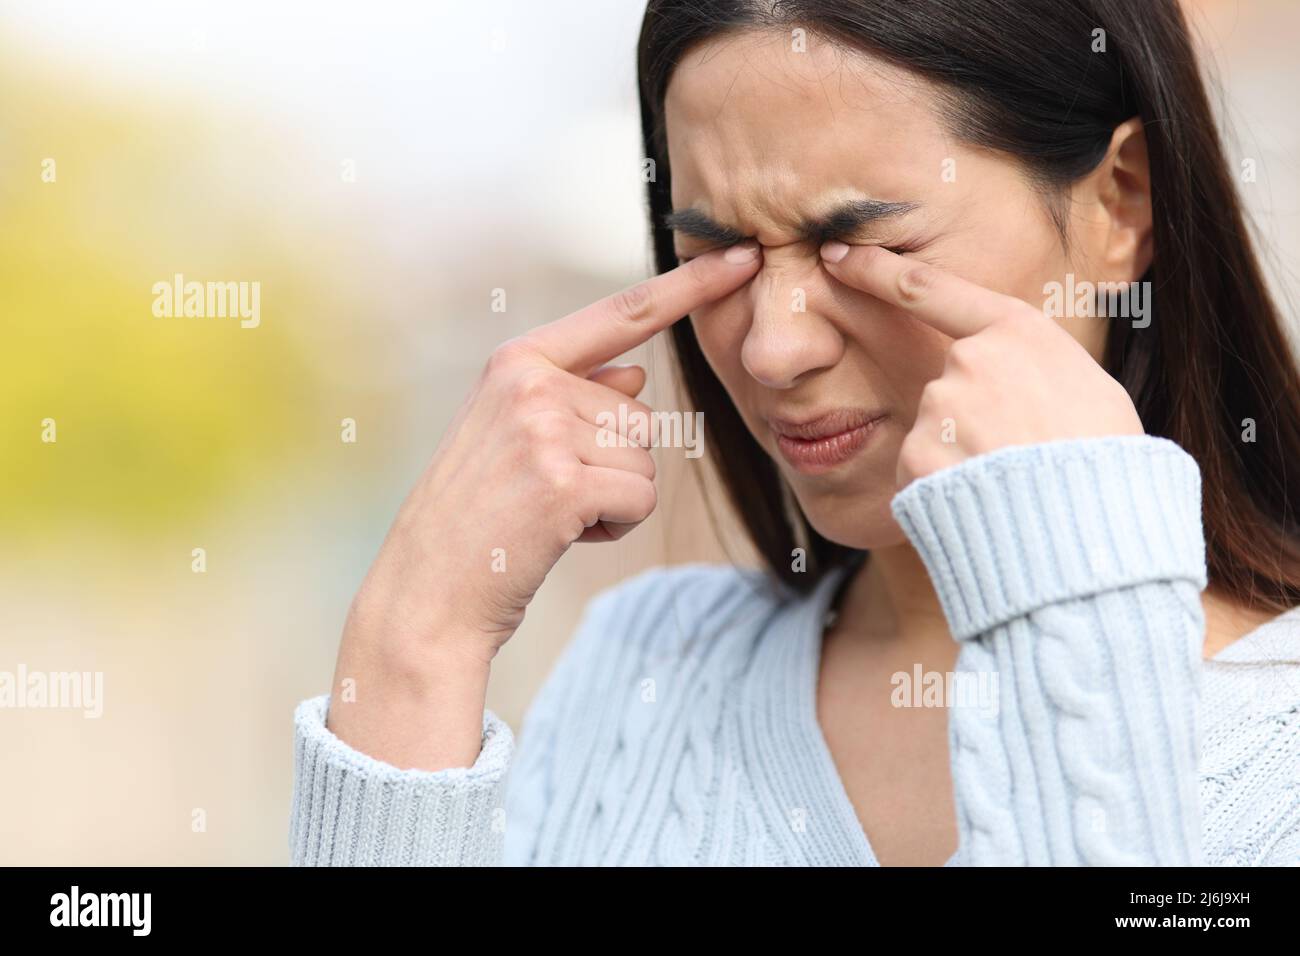 Close up of a woman scratching itchy eyes with her hands in a park Stock Photo